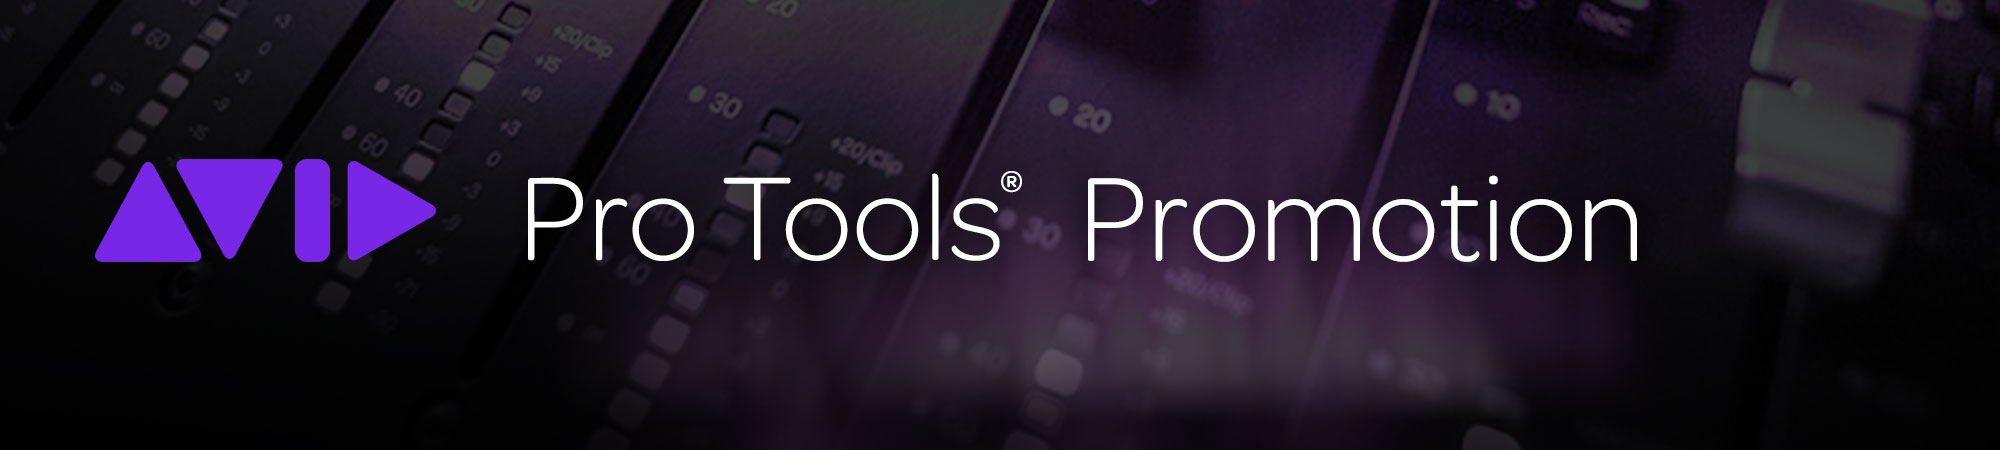 Banner Pro Tools Promotion